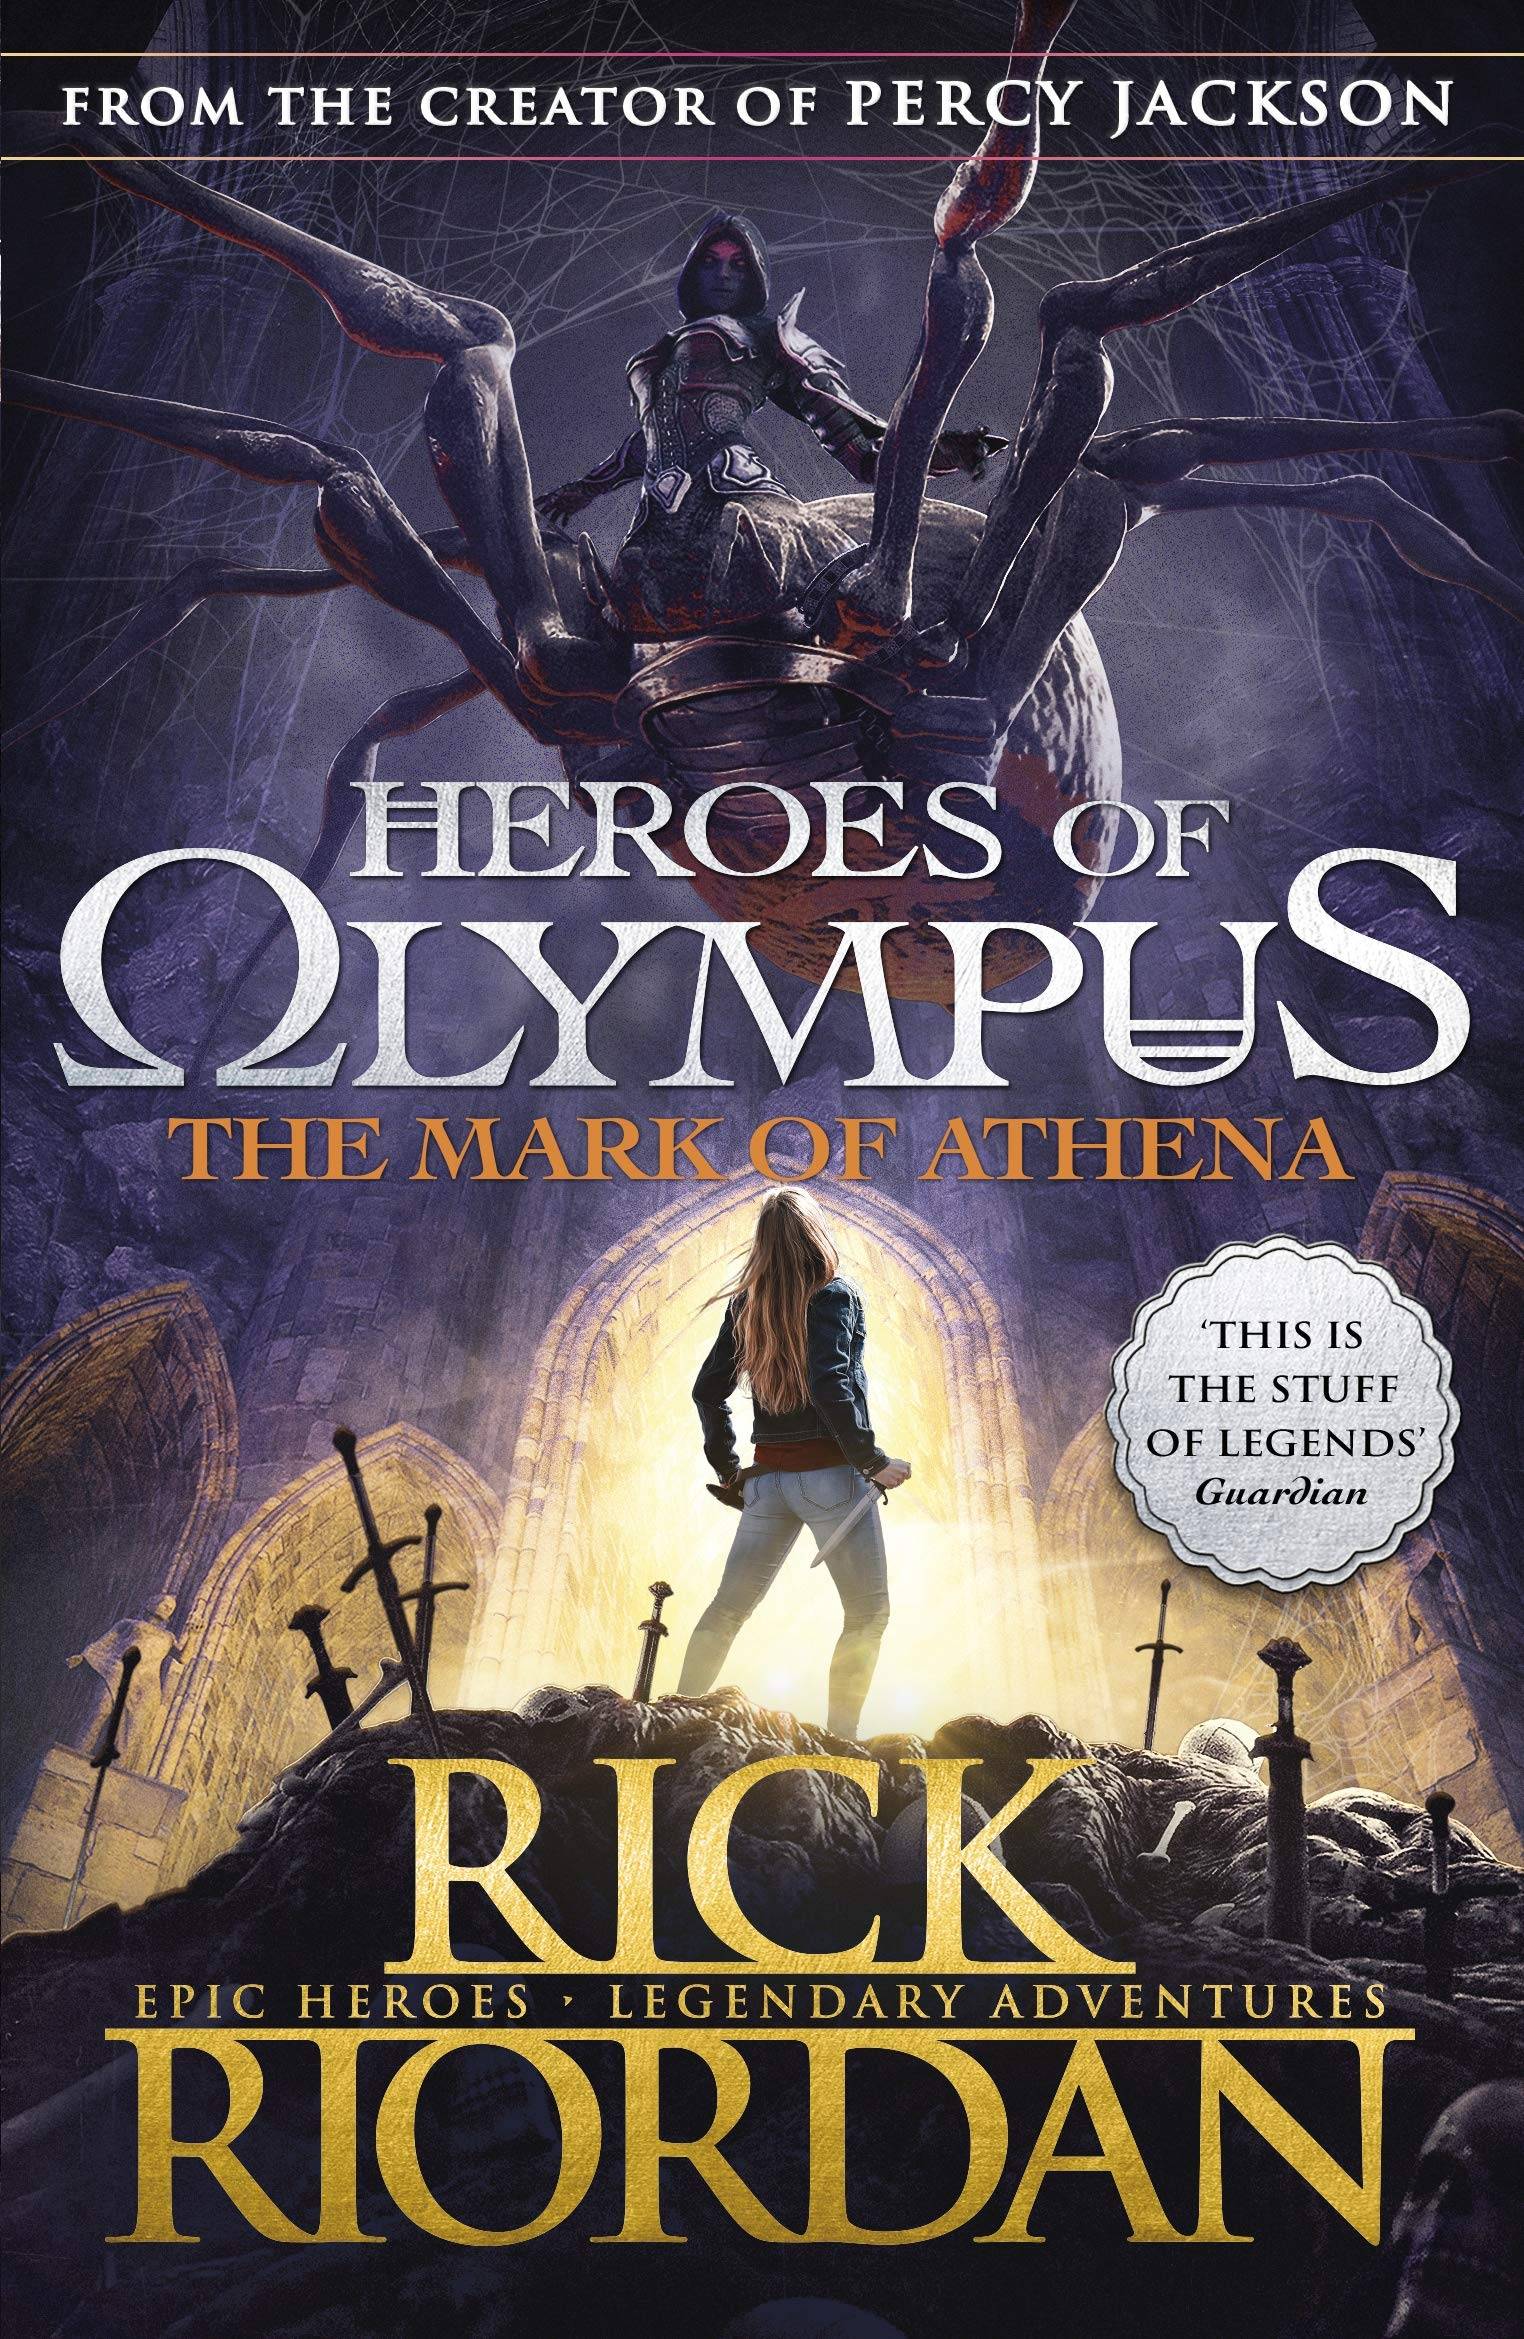 IMG : Heroes of Olympus The Mark of Athena #3